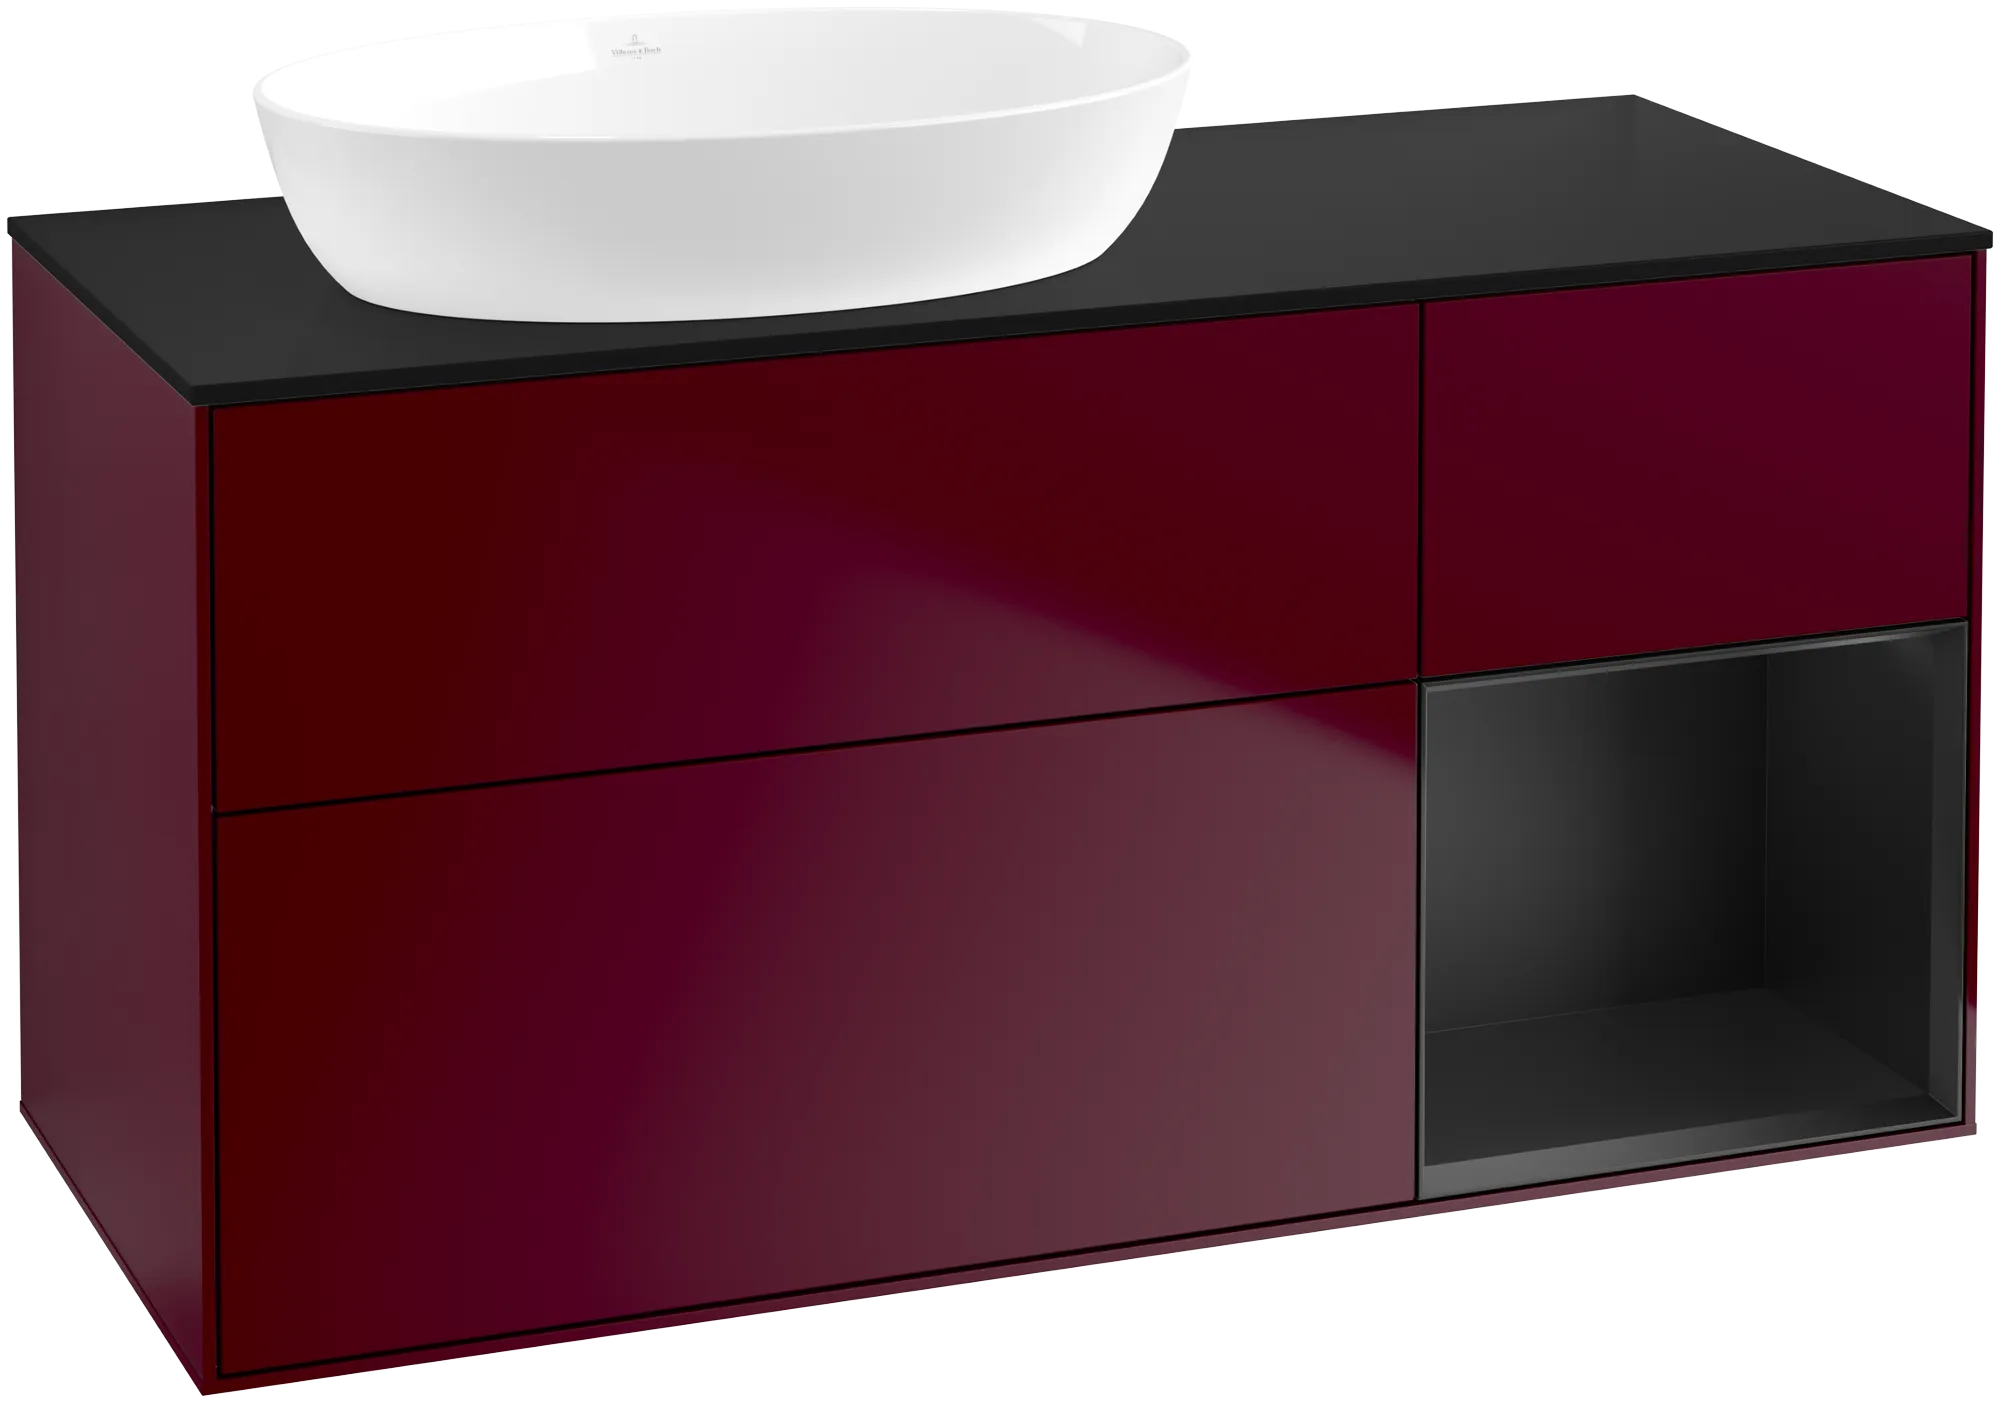 Picture of VILLEROY BOCH Finion Vanity unit, with lighting, 3 pull-out compartments, 1200 x 603 x 501 mm, Peony Matt Lacquer / Black Matt Lacquer / Glass Black Matt #FA52PDHB